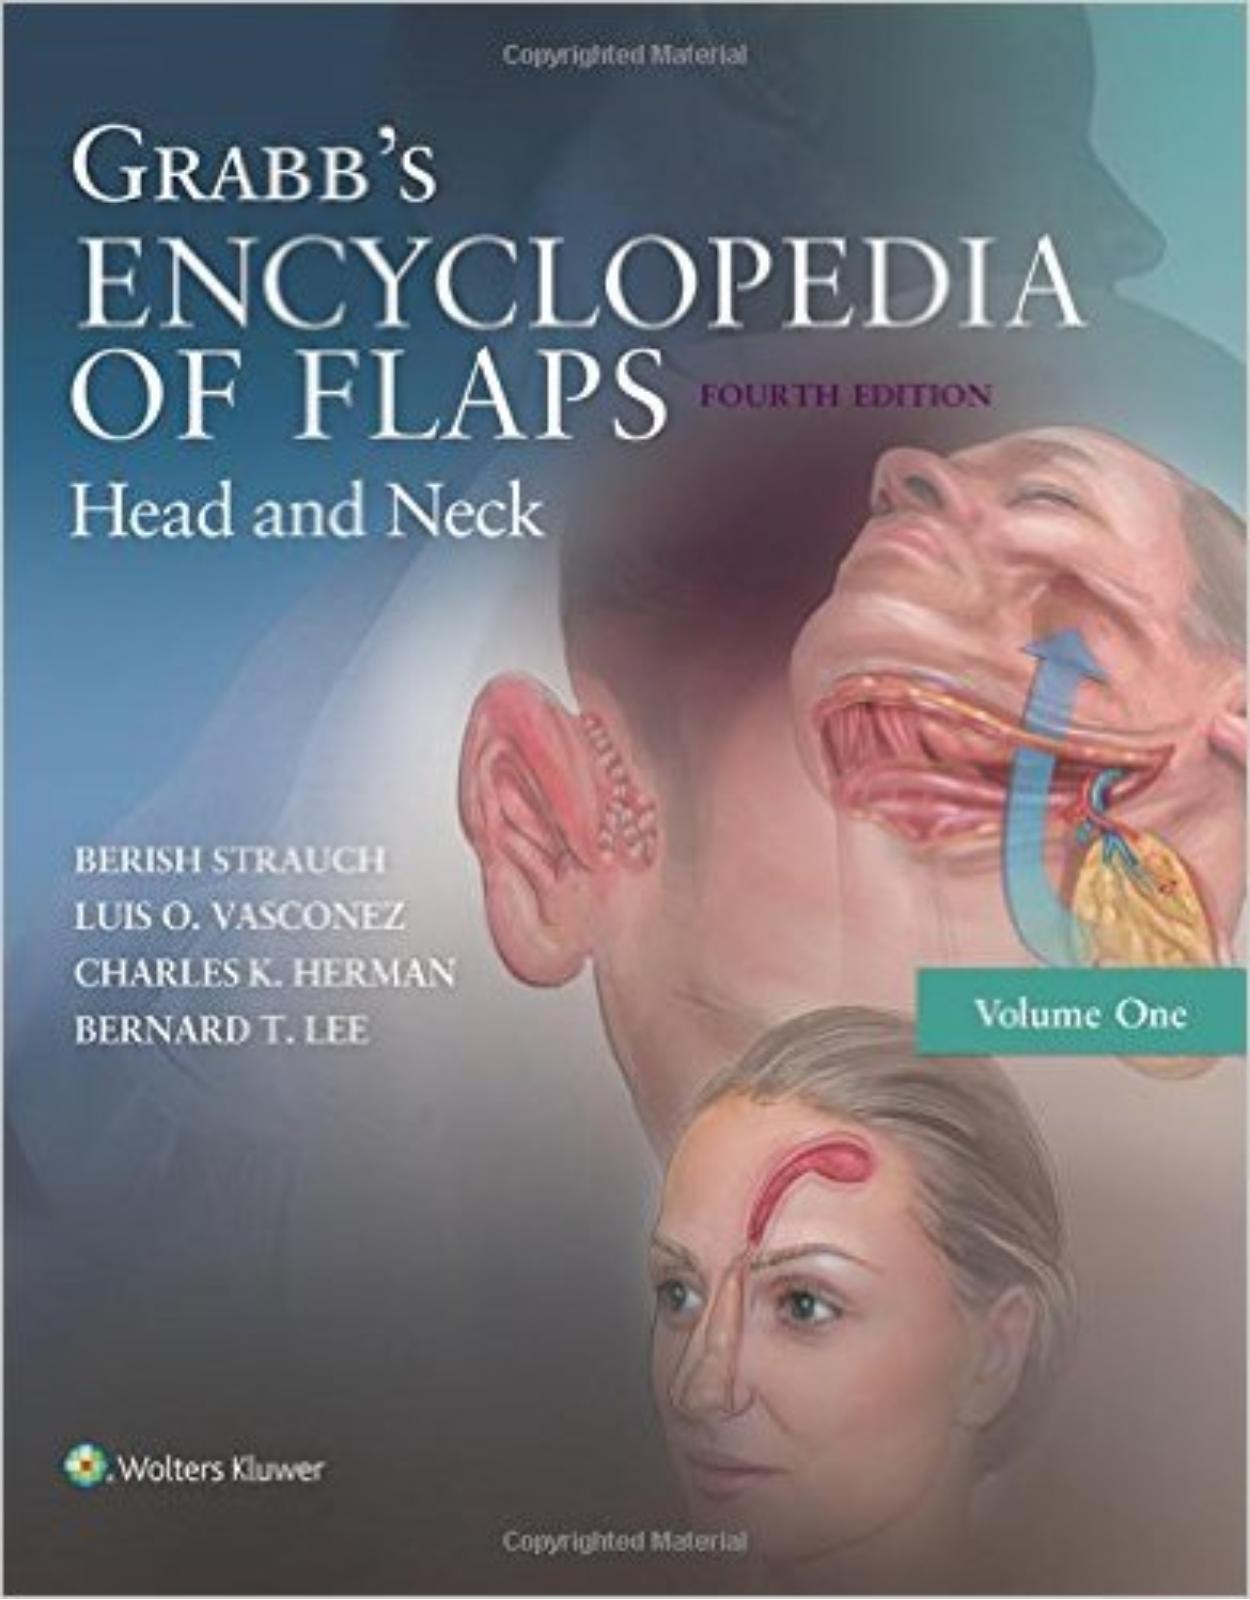 Grabb's Encyclopedia of Flaps: Head and Neck: Volume 1